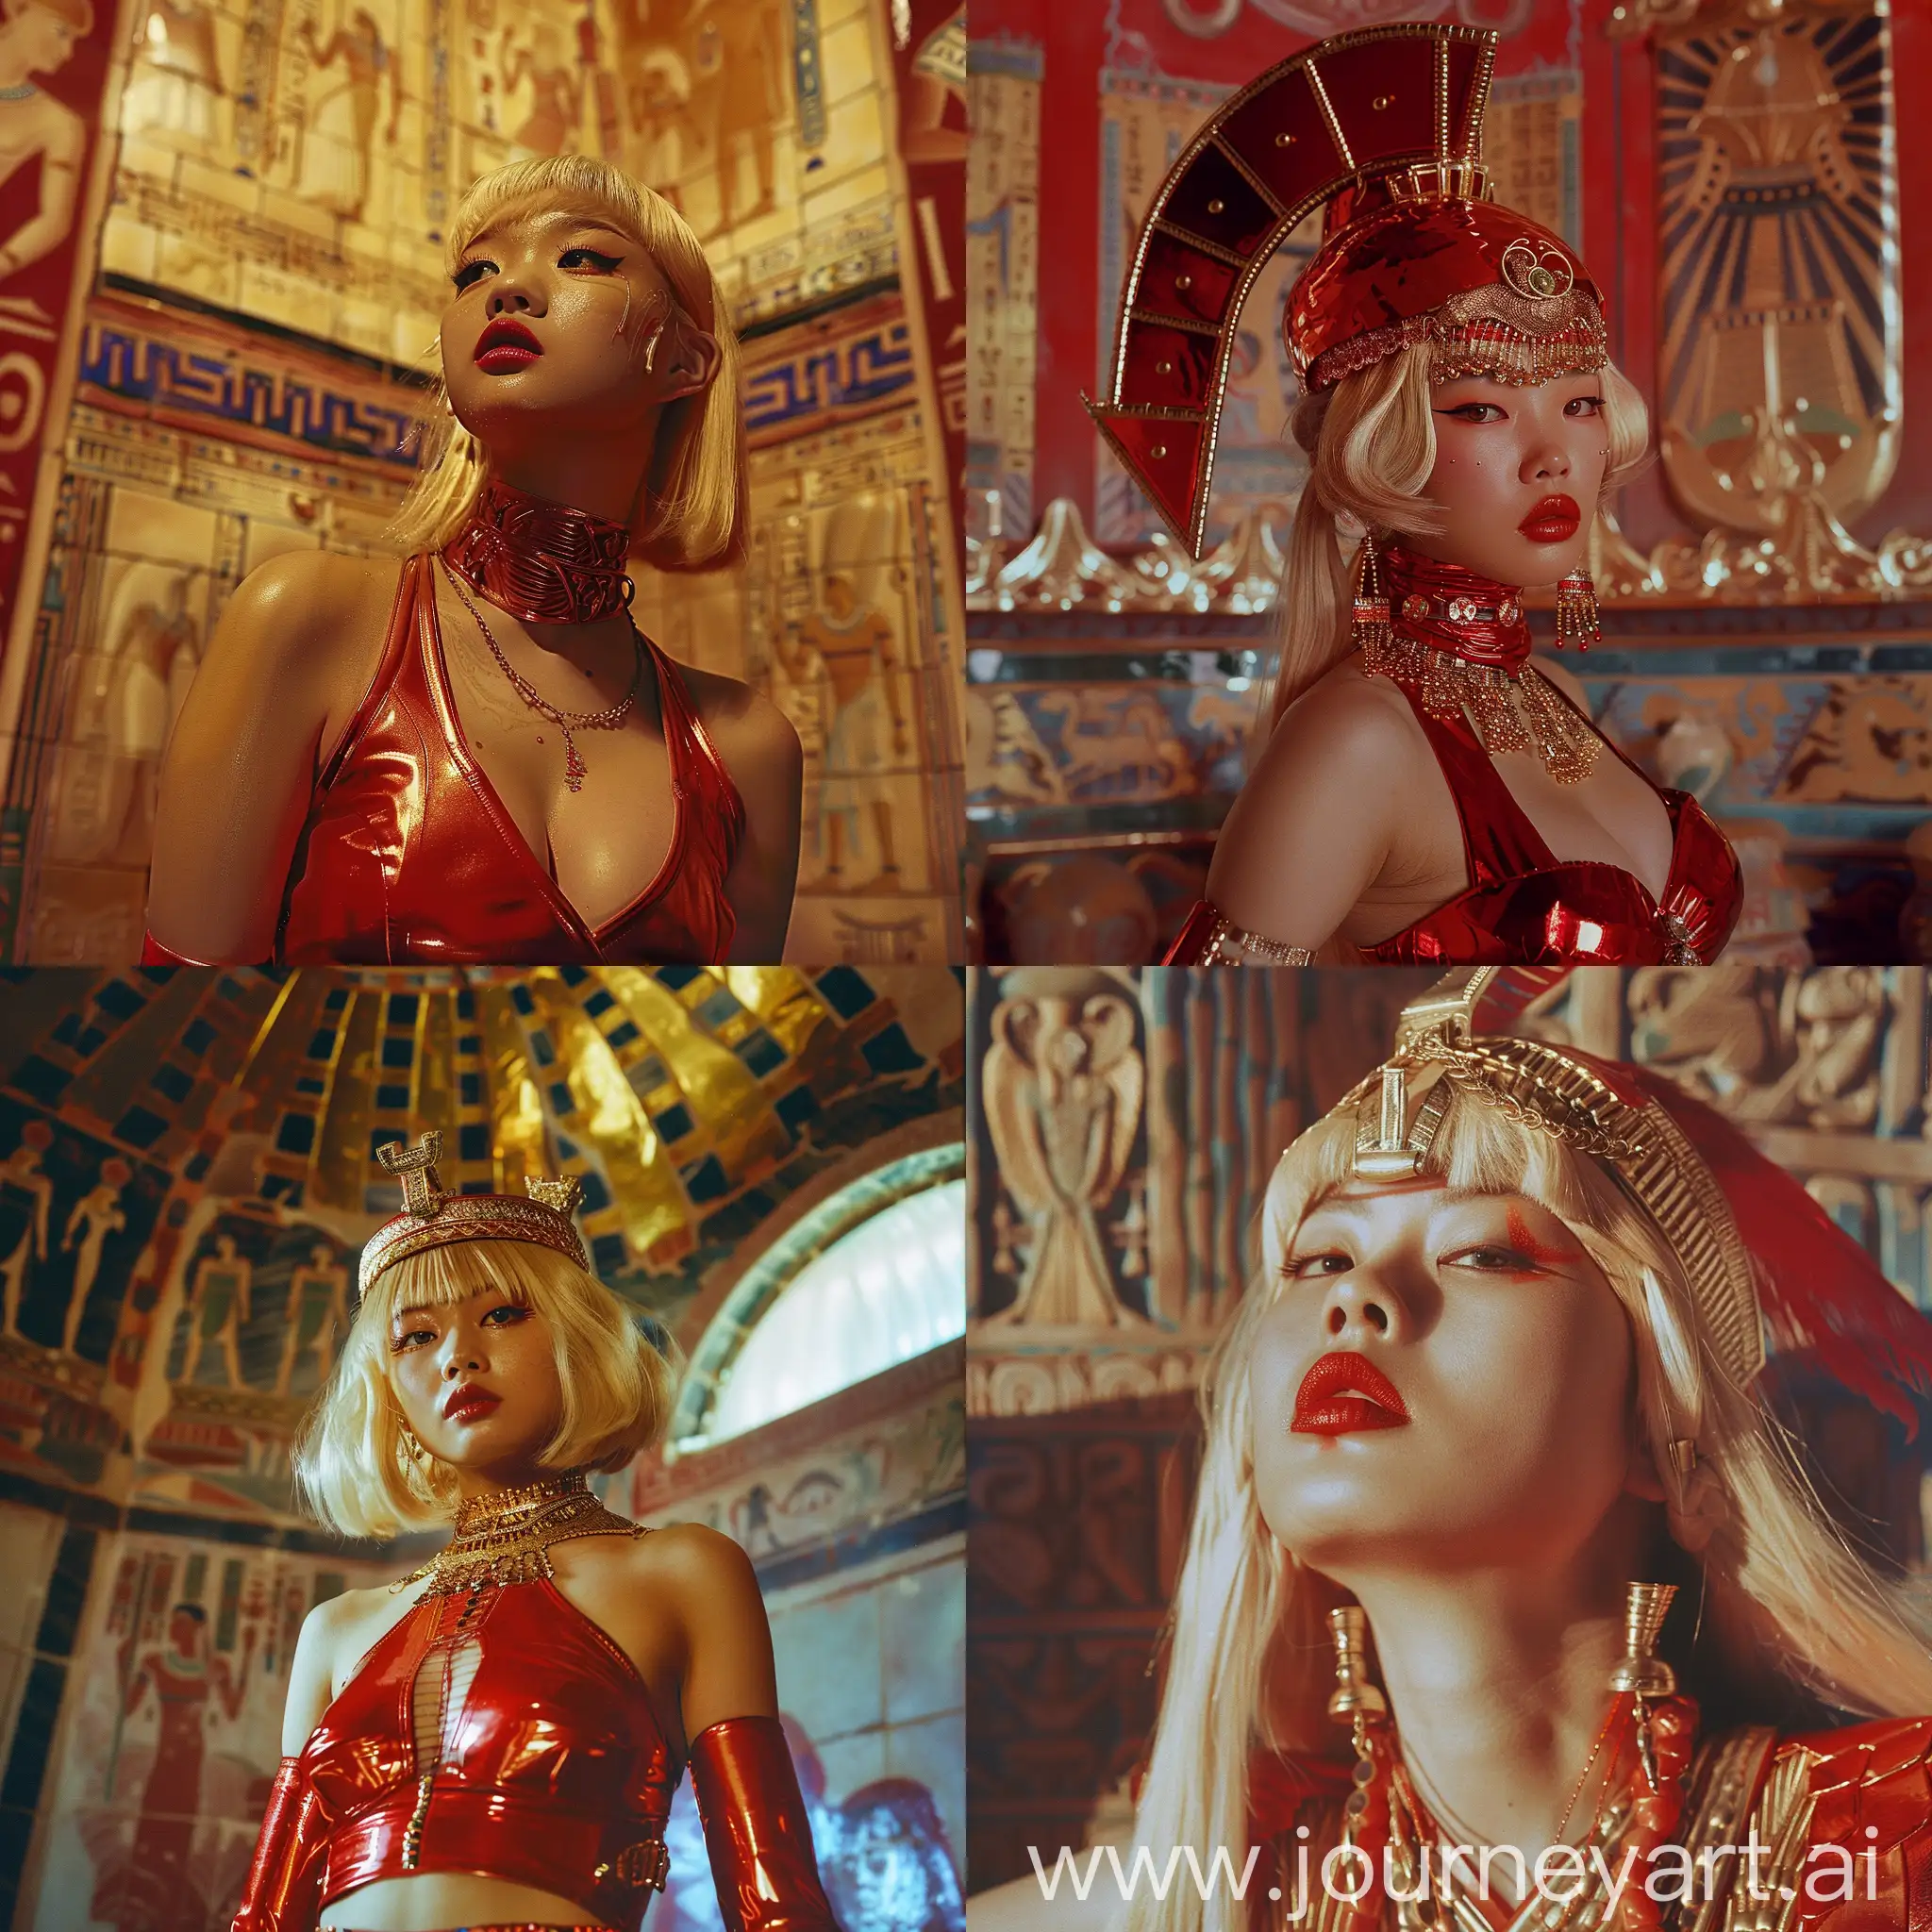 Hyperrealistic-Conceptual-Fashion-Photography-Blonde-Korean-Girl-as-Cleopatra-in-Red-Latex